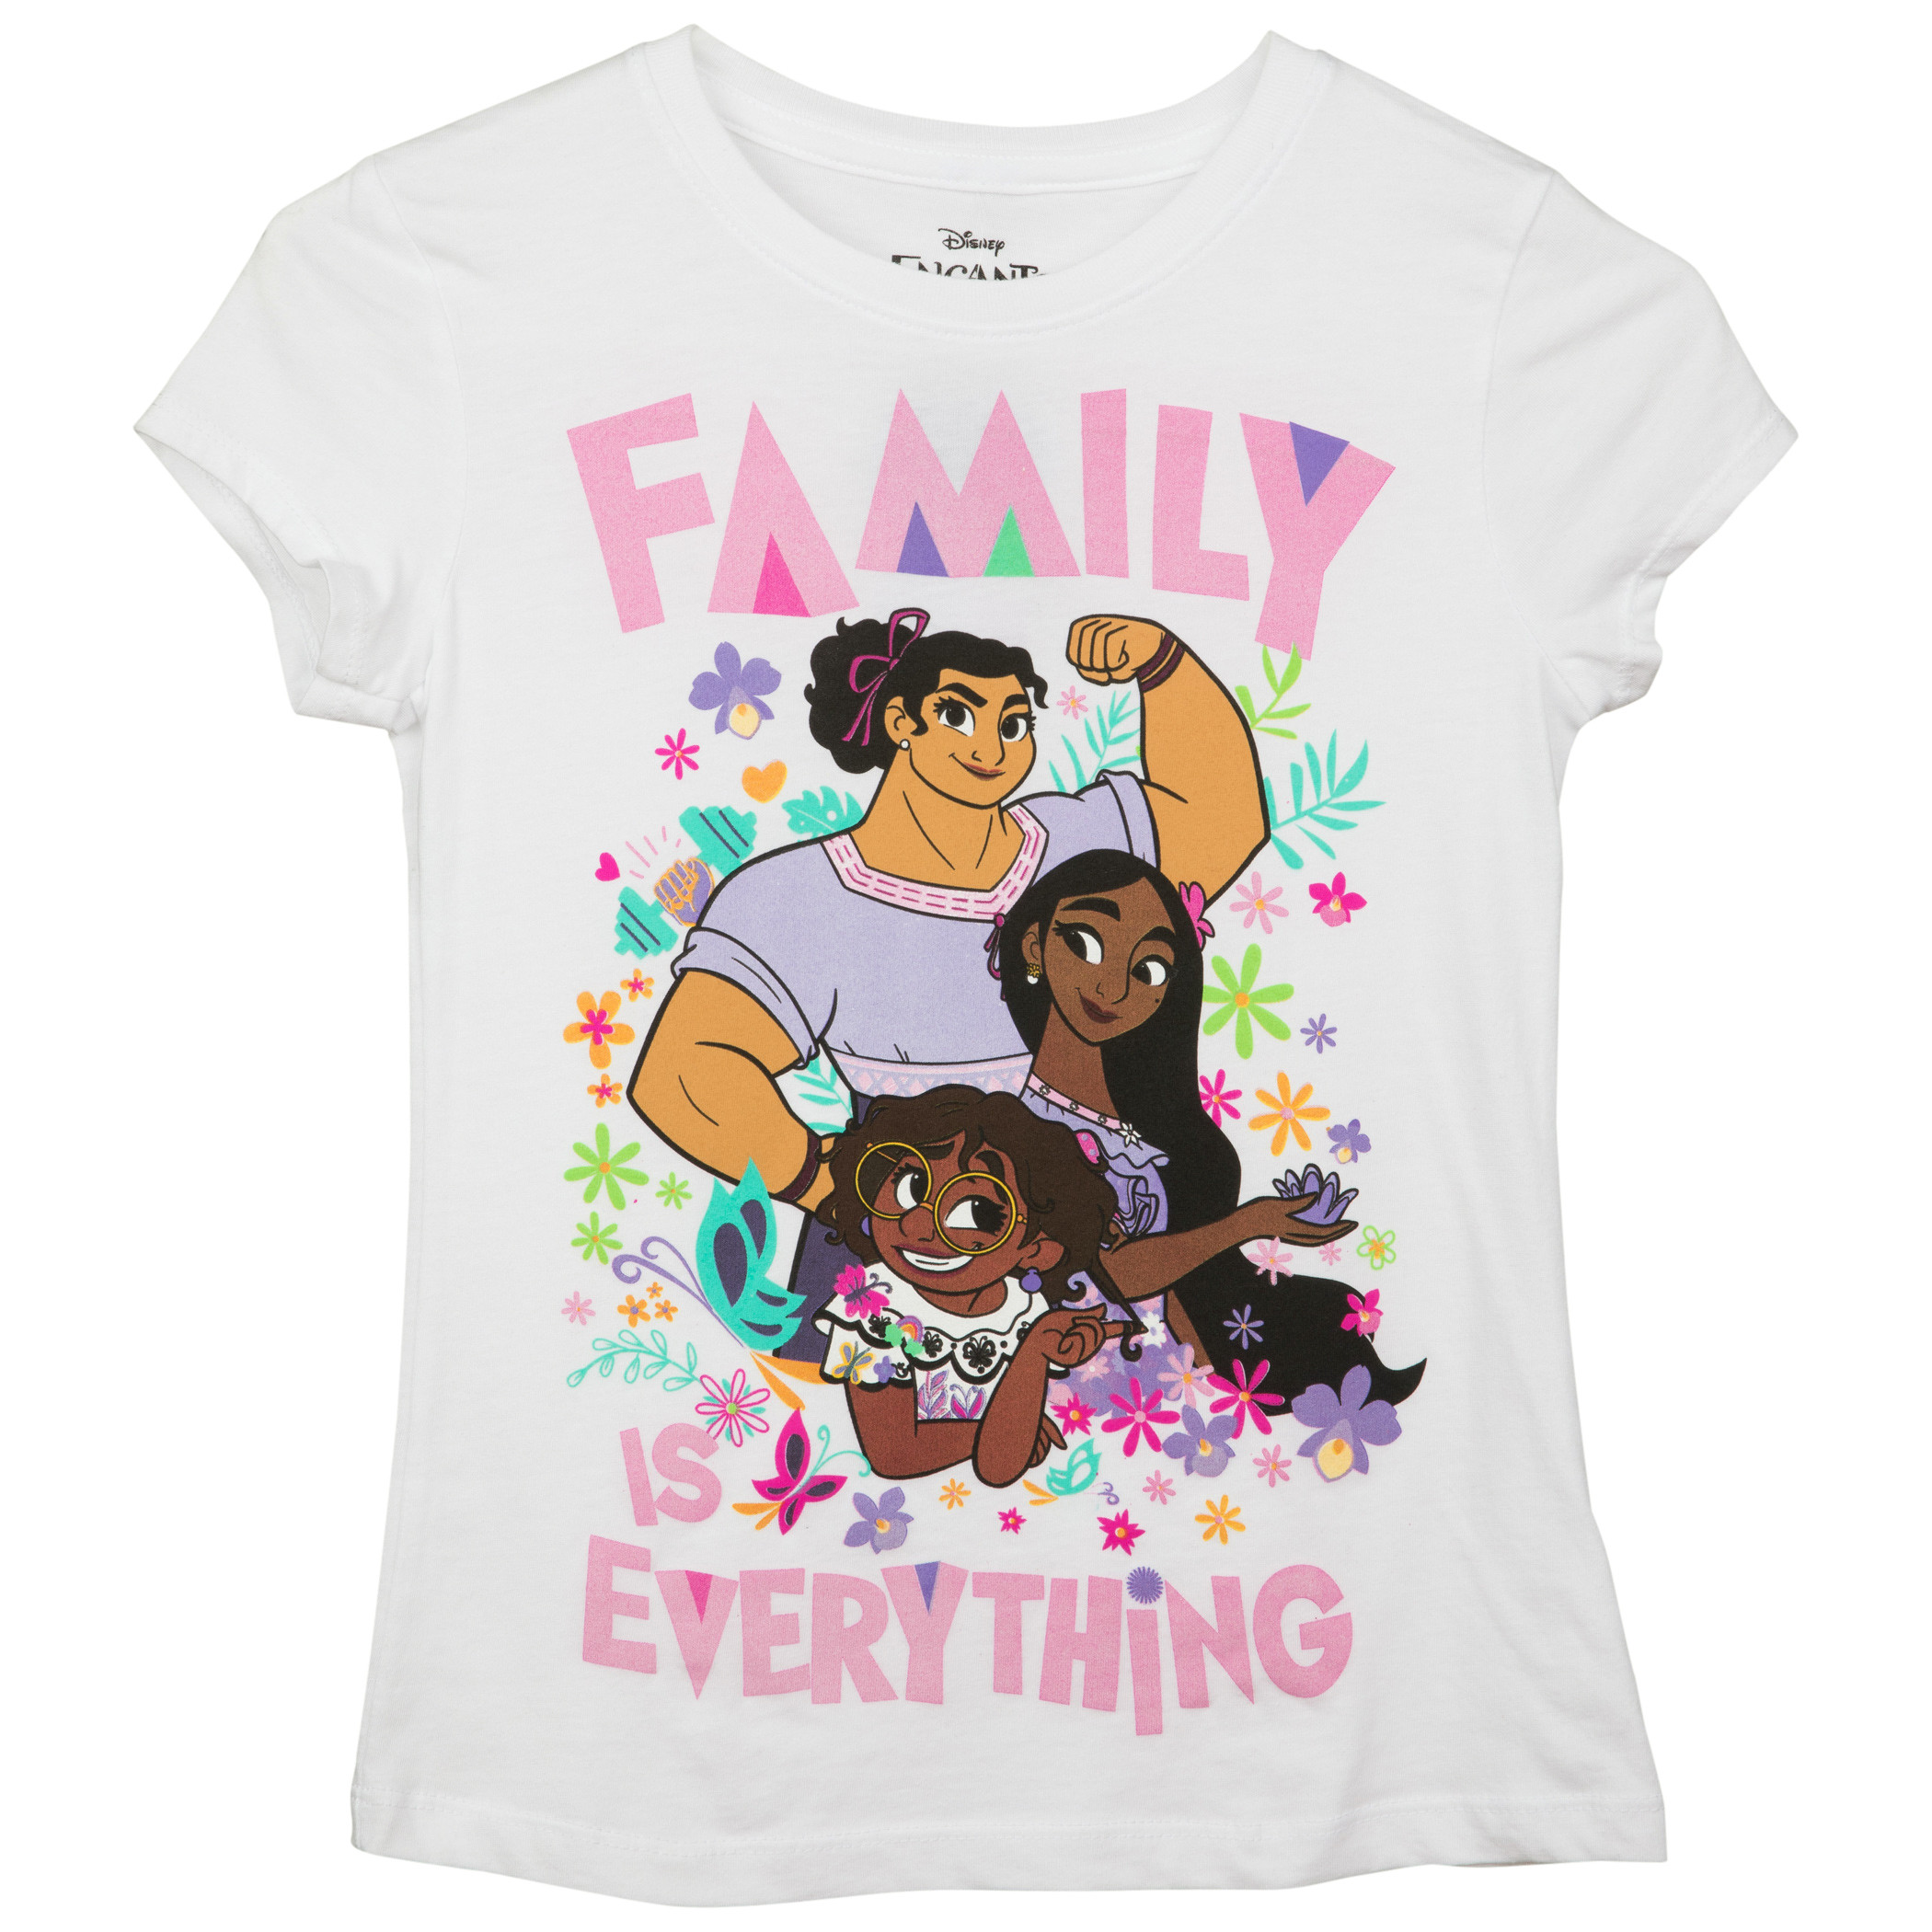 Encanto Family Is Everything Junior's T-Shirt